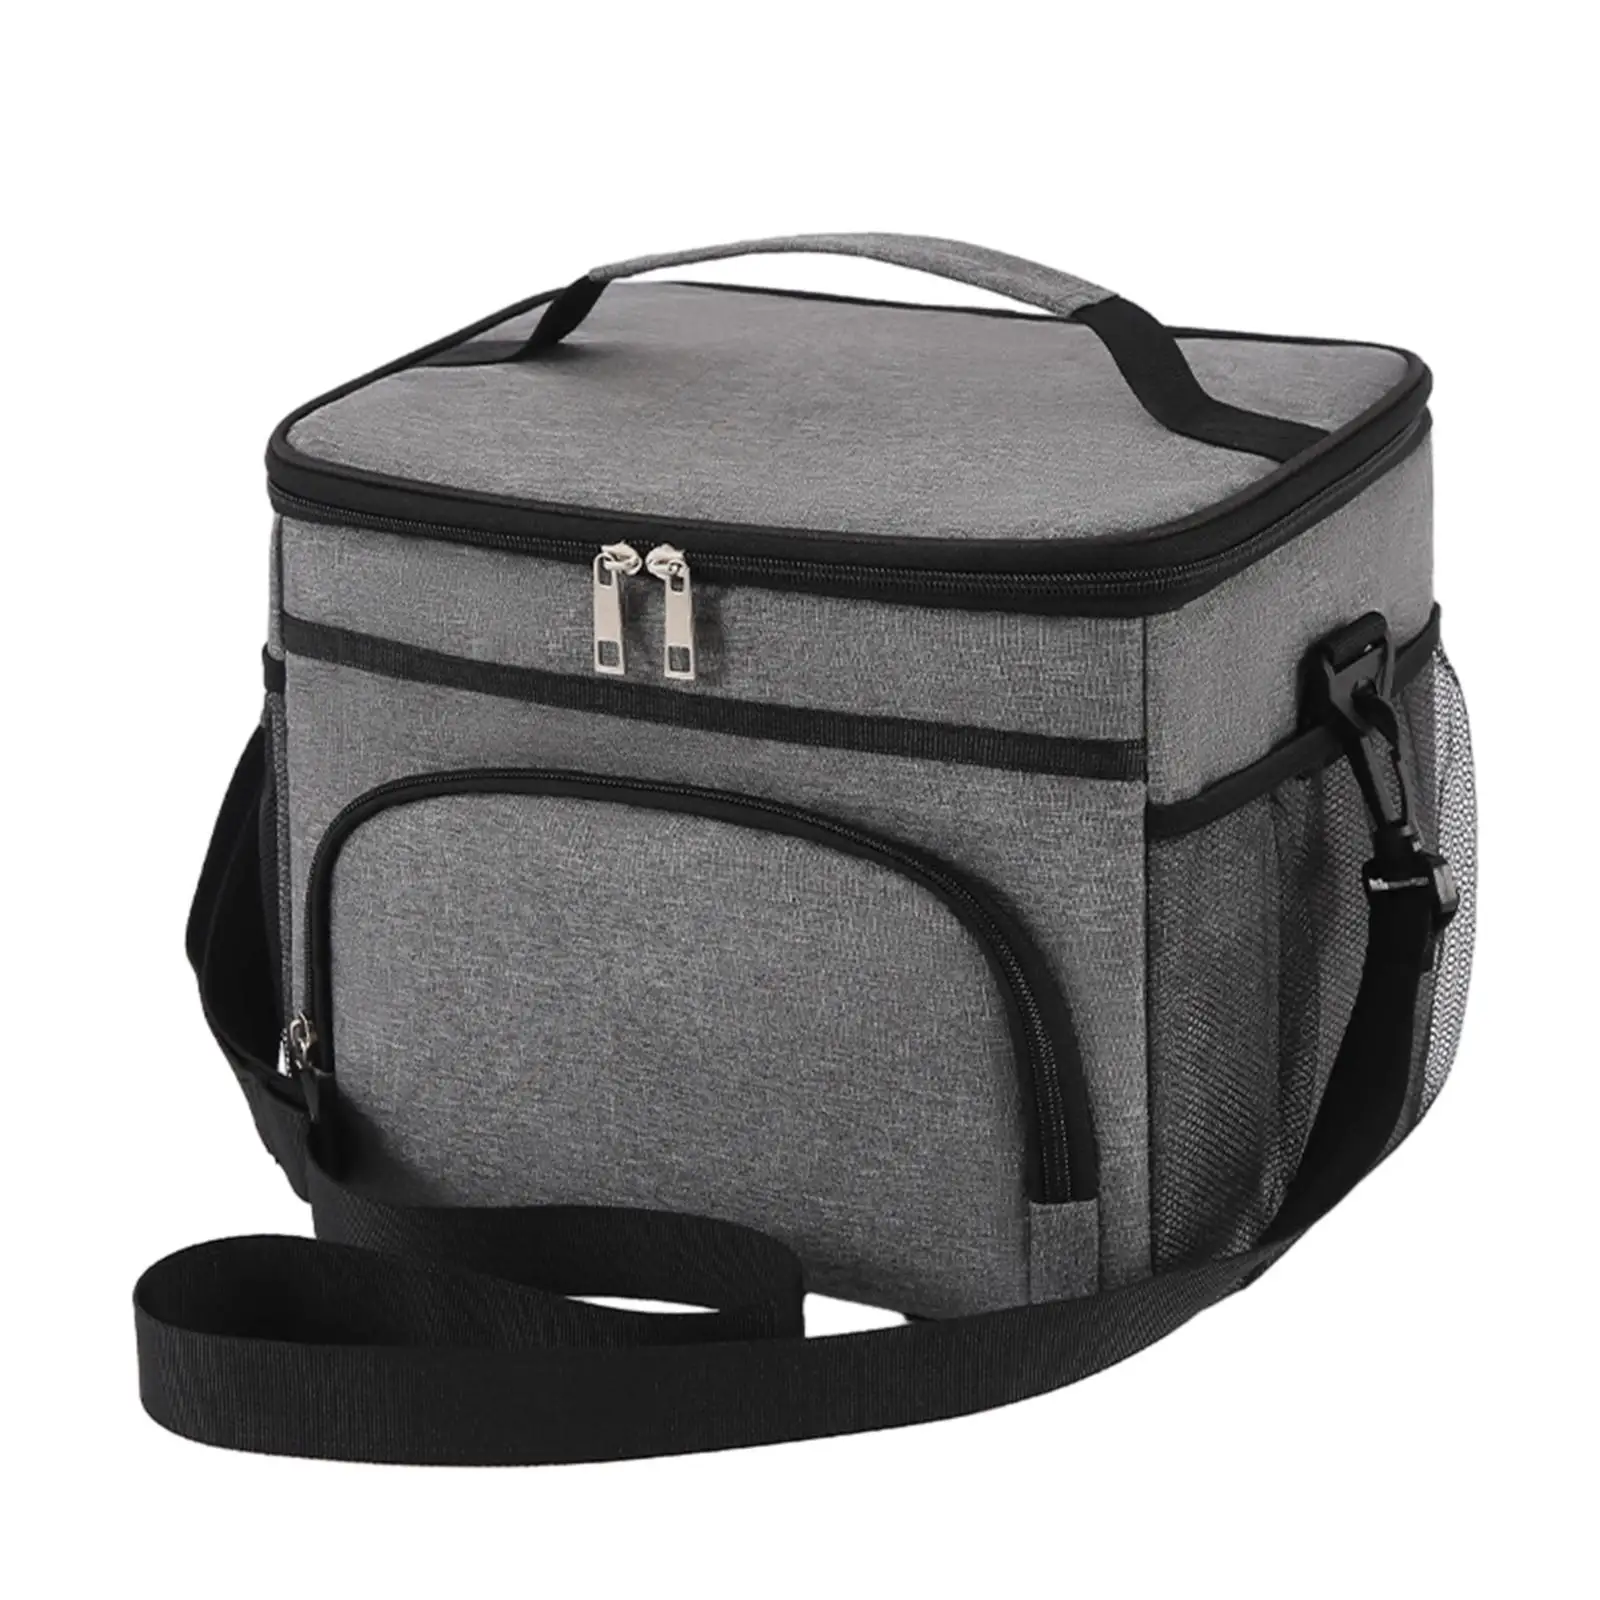 Portable Lunchbox Hiking Adults Office Food Bento Pouch Dinner Container